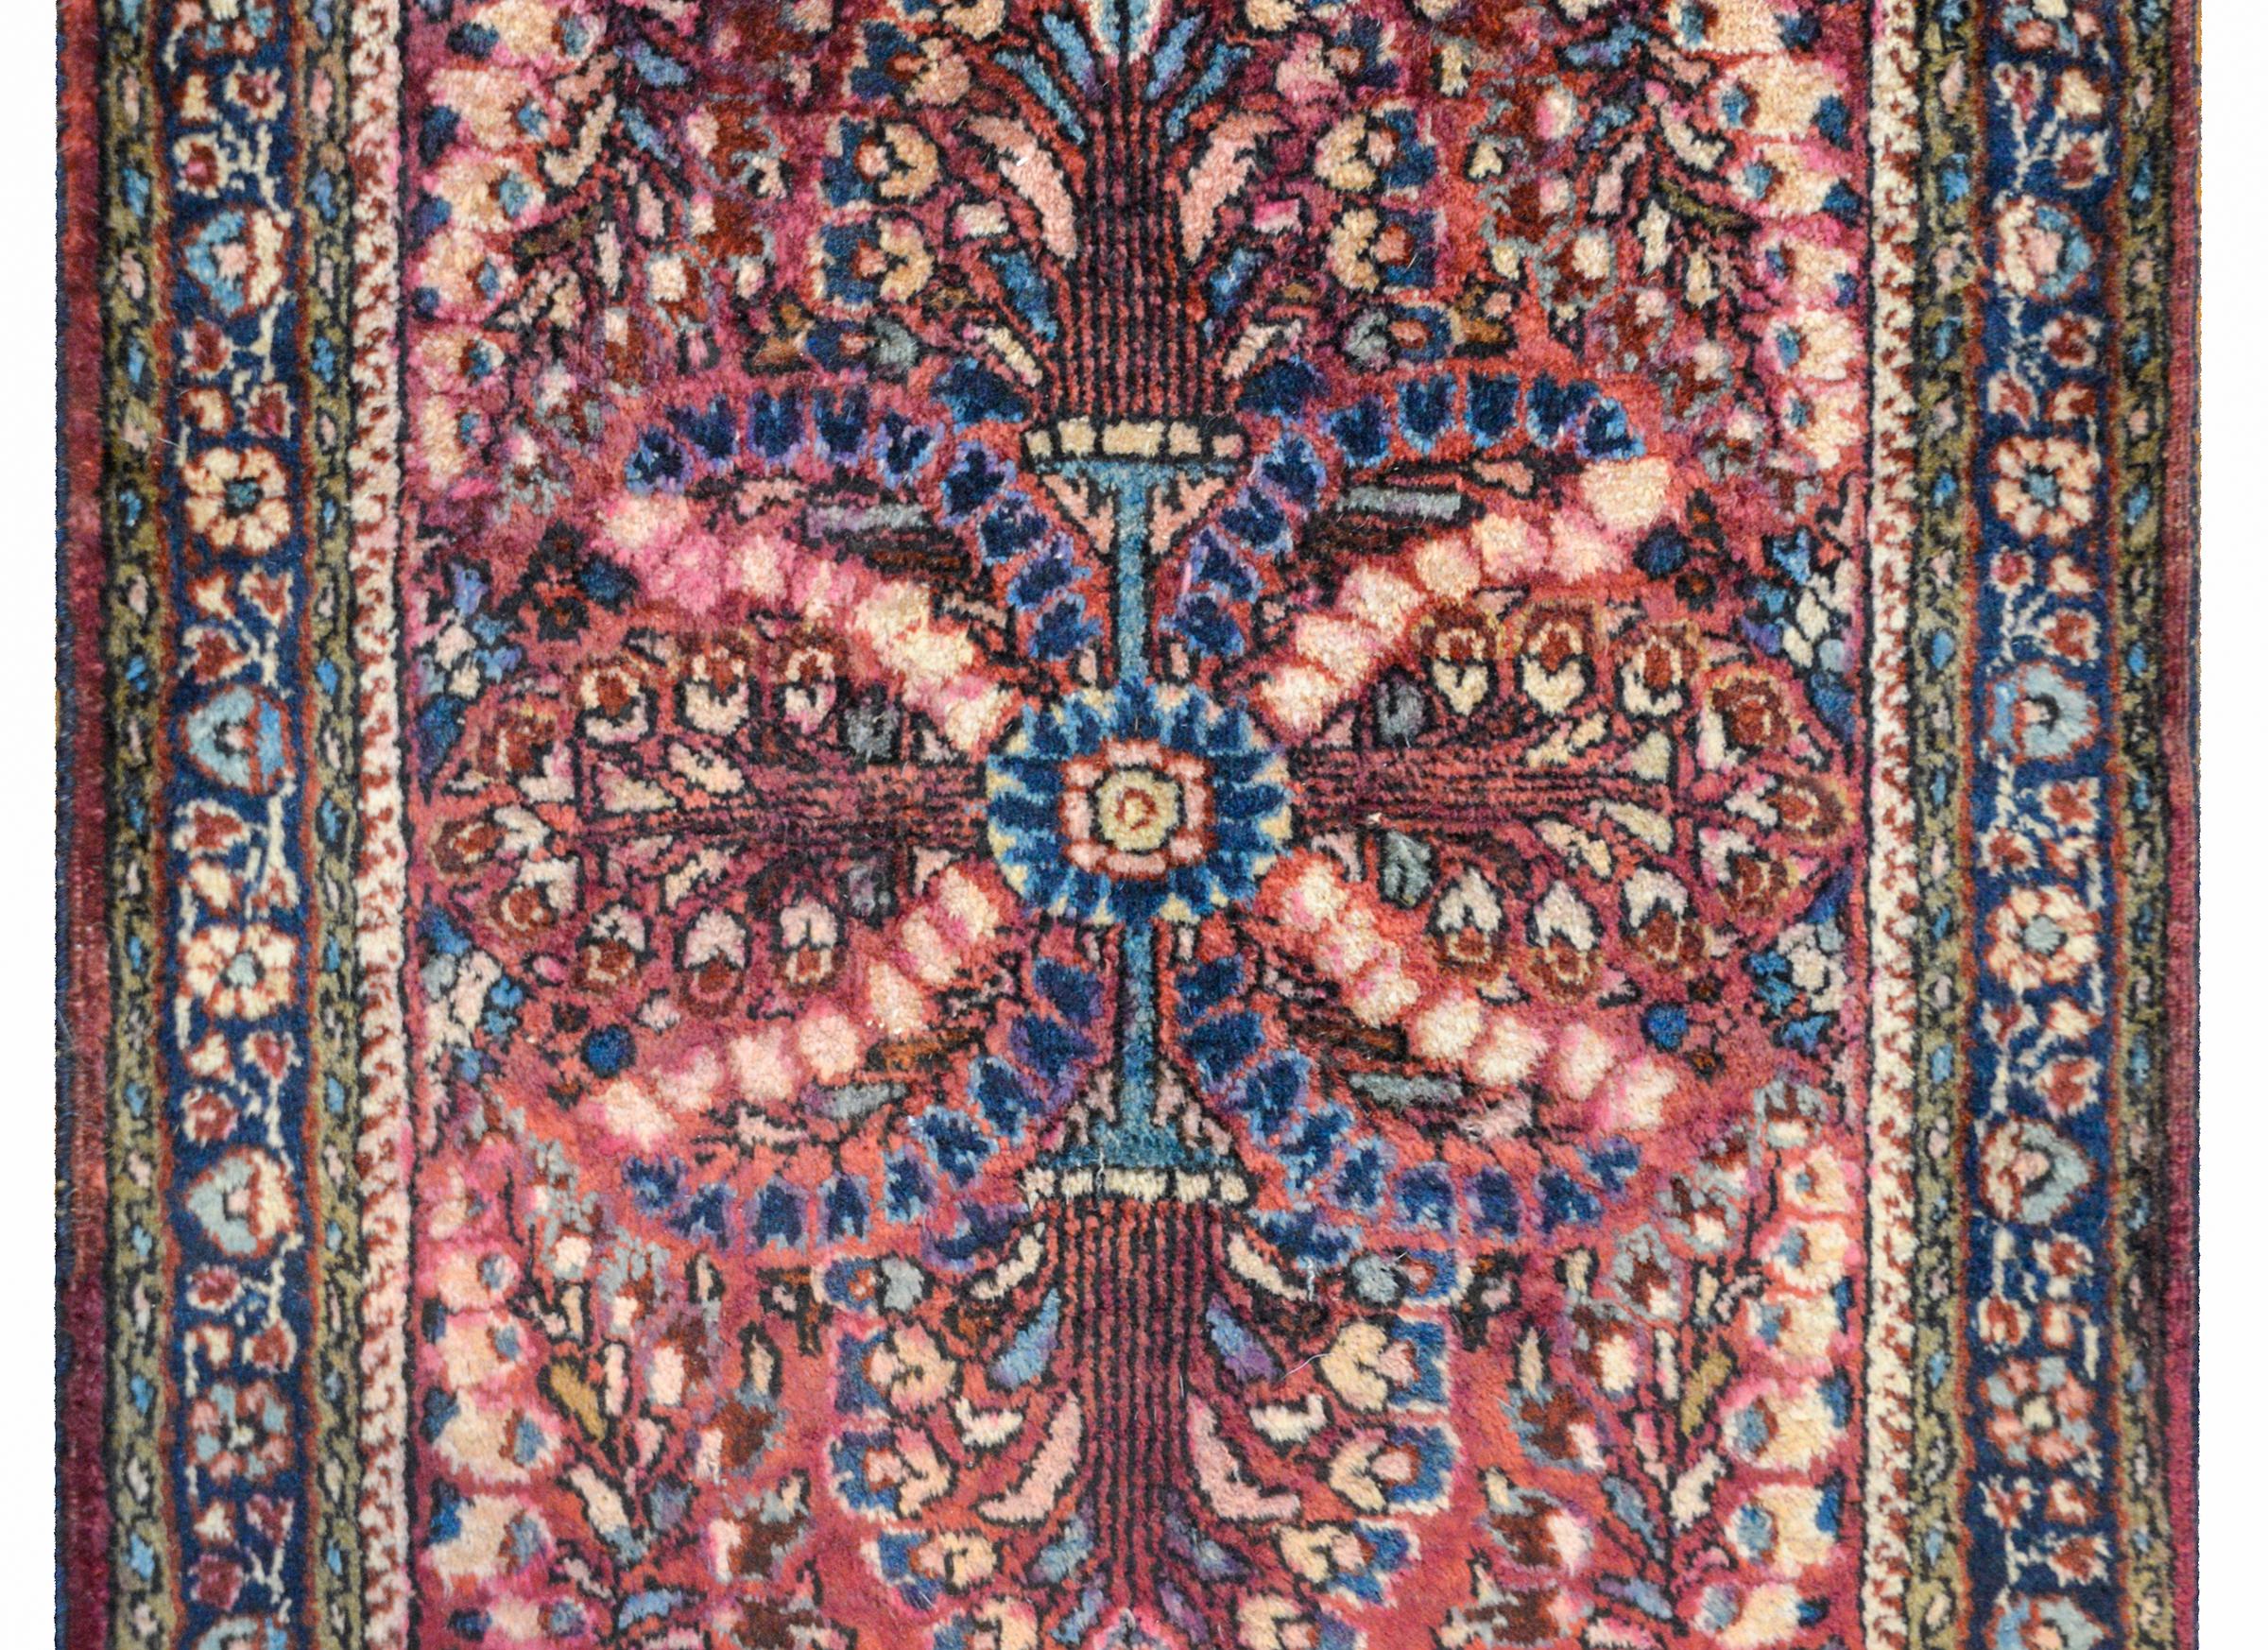 A beautiful early 20th century Persian Sarouk rug with a mirrored tree-of-life pattern woven in cream, cranberry, light and dark indigo, and pink colored vegetable dyed wool surrounded by a complex border of multiple floral patterned stripes.